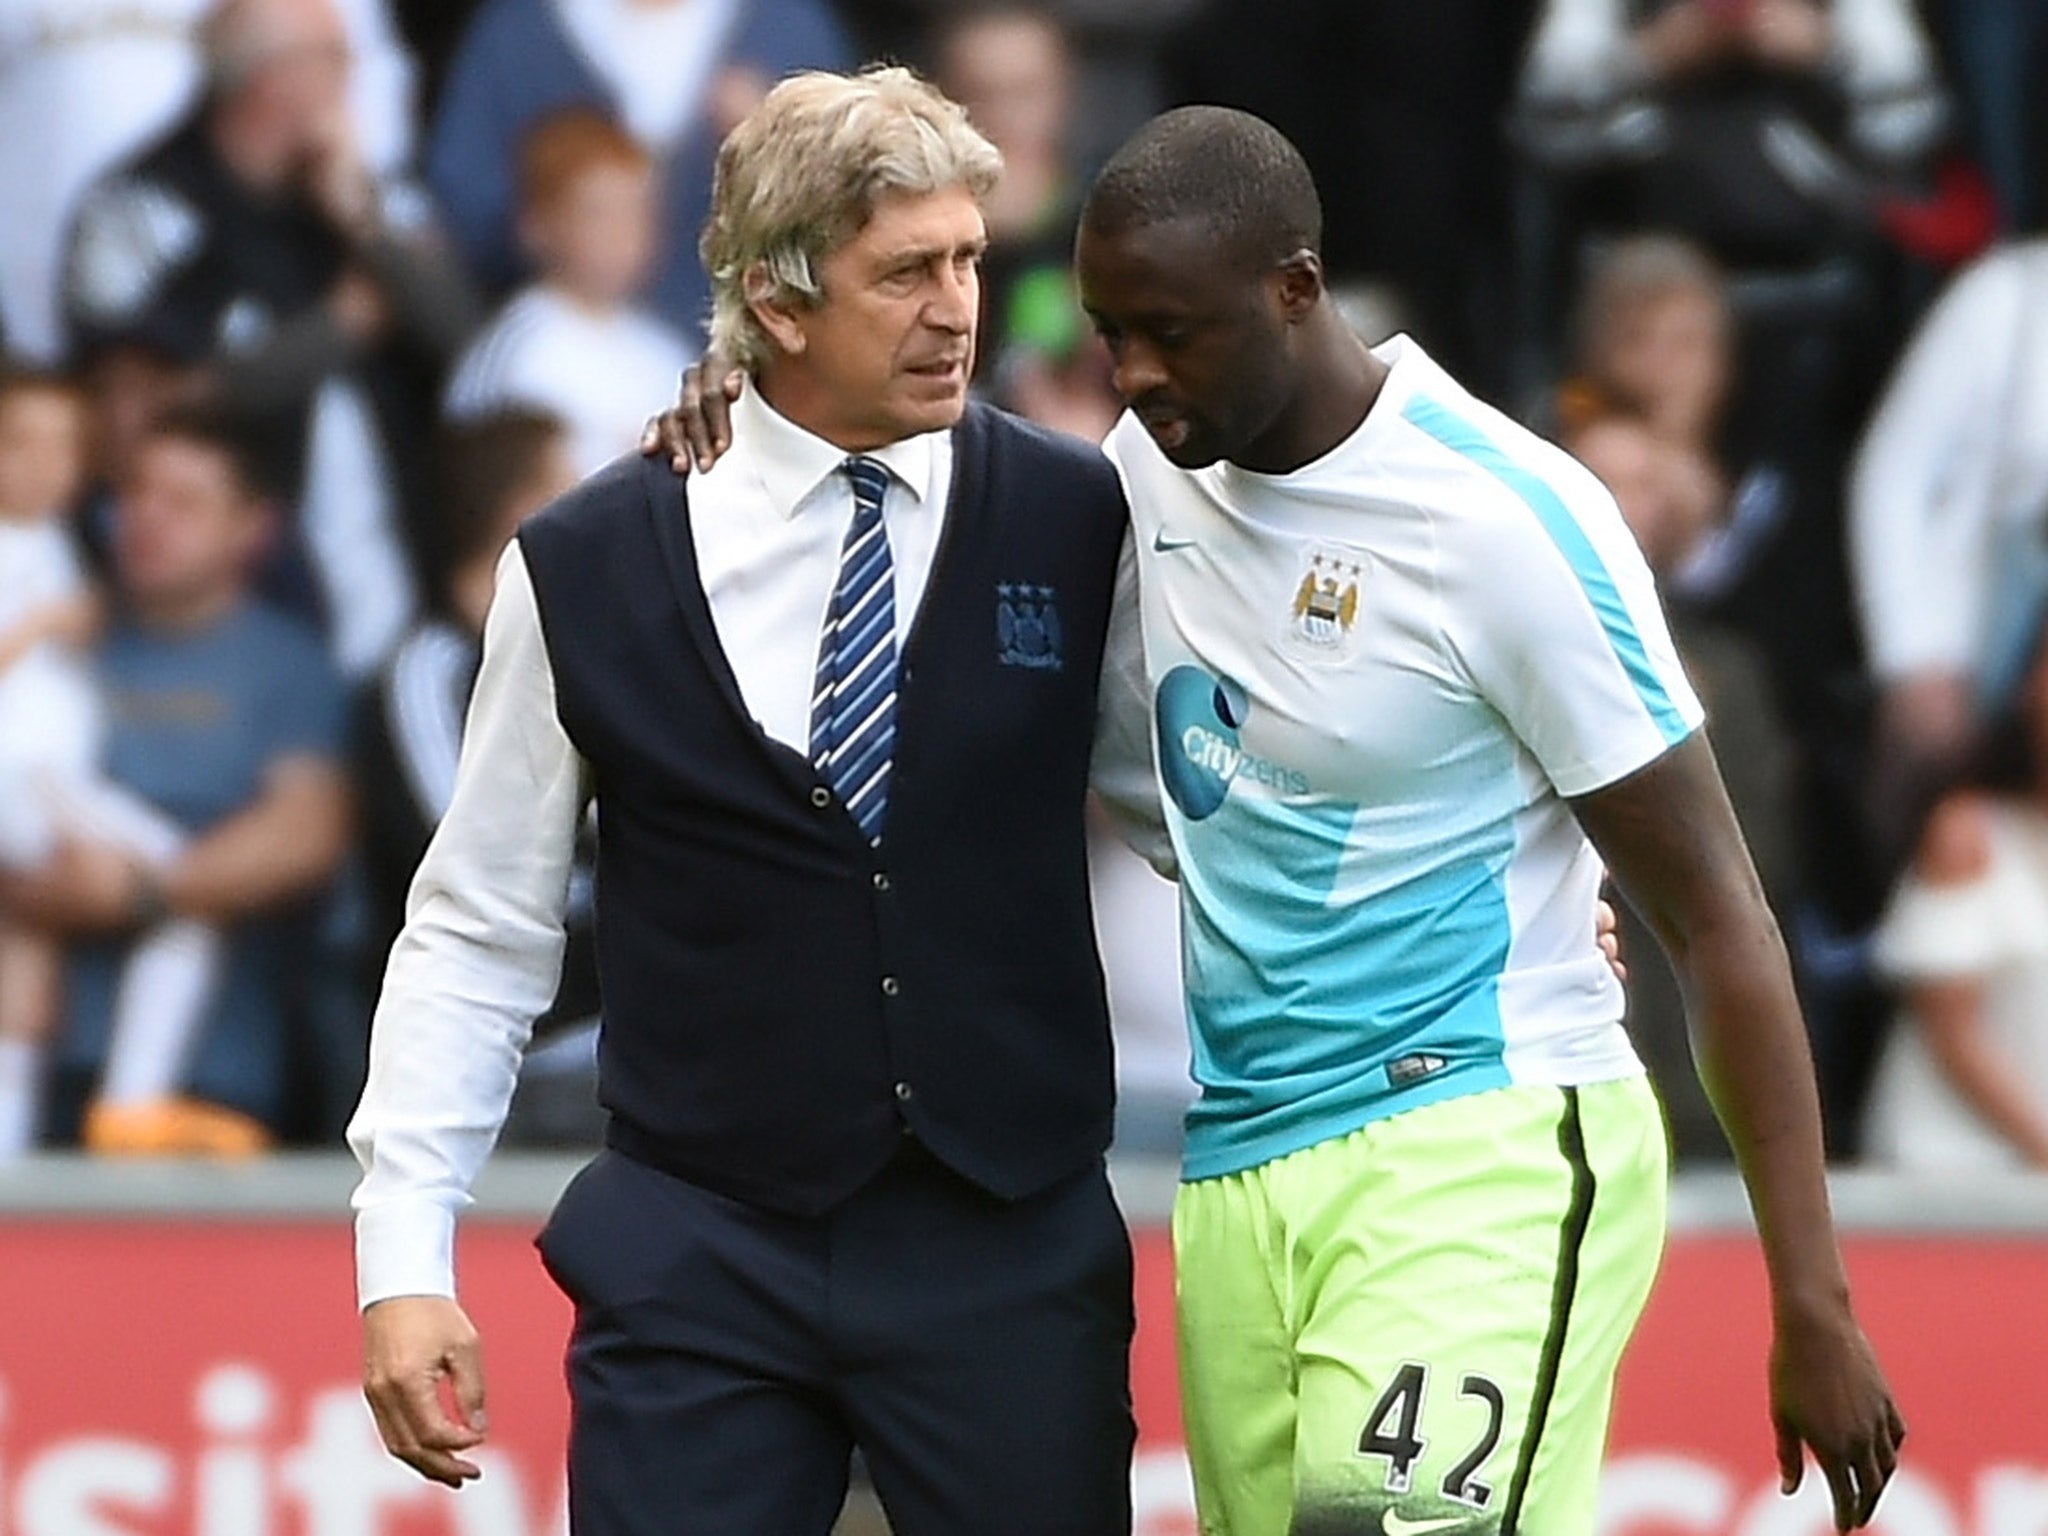 Yaya Toure is in talks to leave Manchester City and join Inter Milan